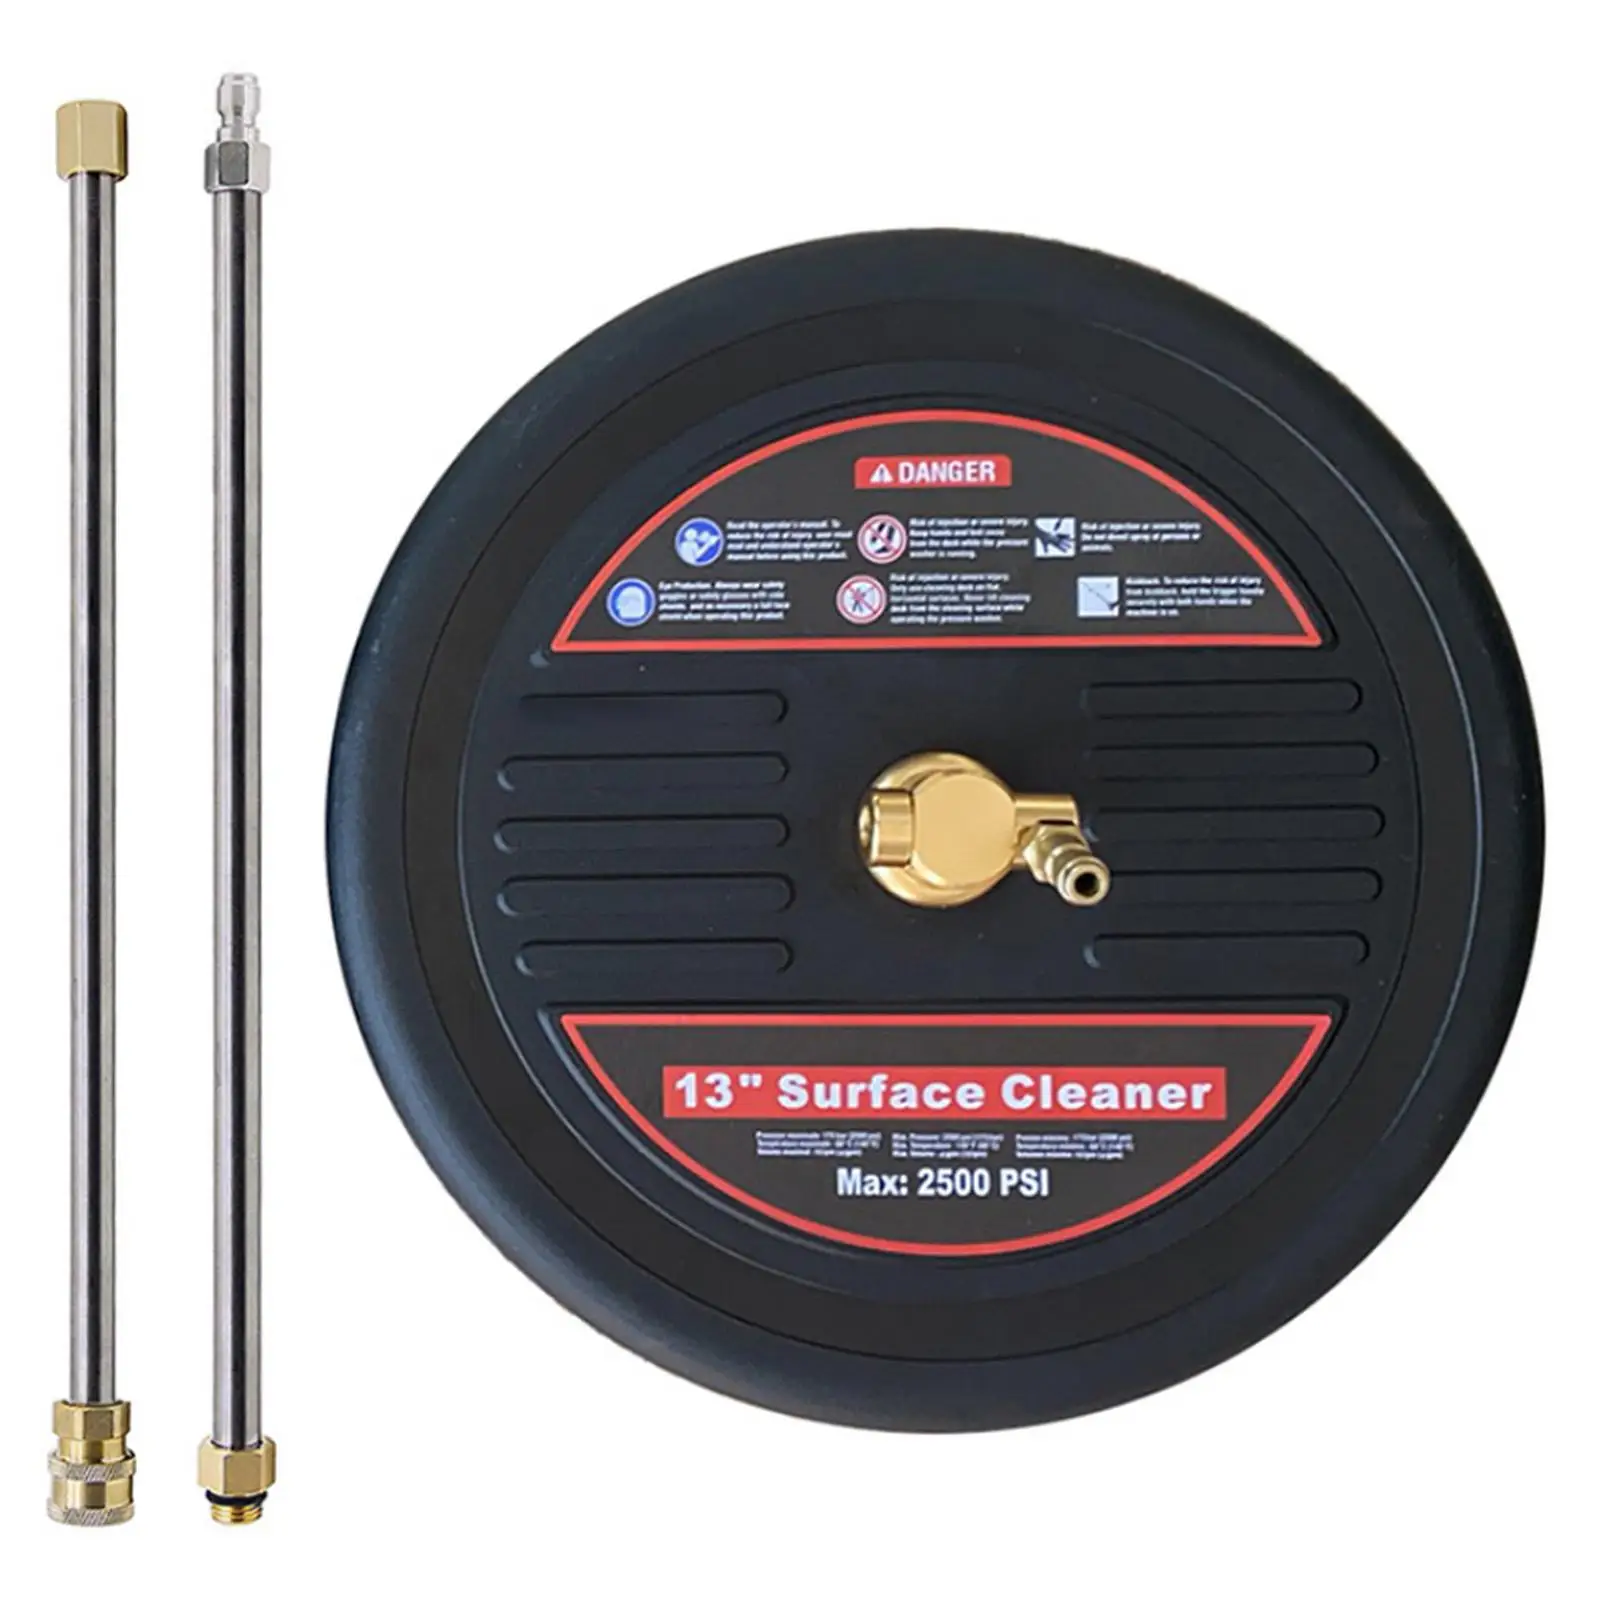 13`` Surface Cleaner Attachment 2 Max Pressure for Cleaning Sidewalks